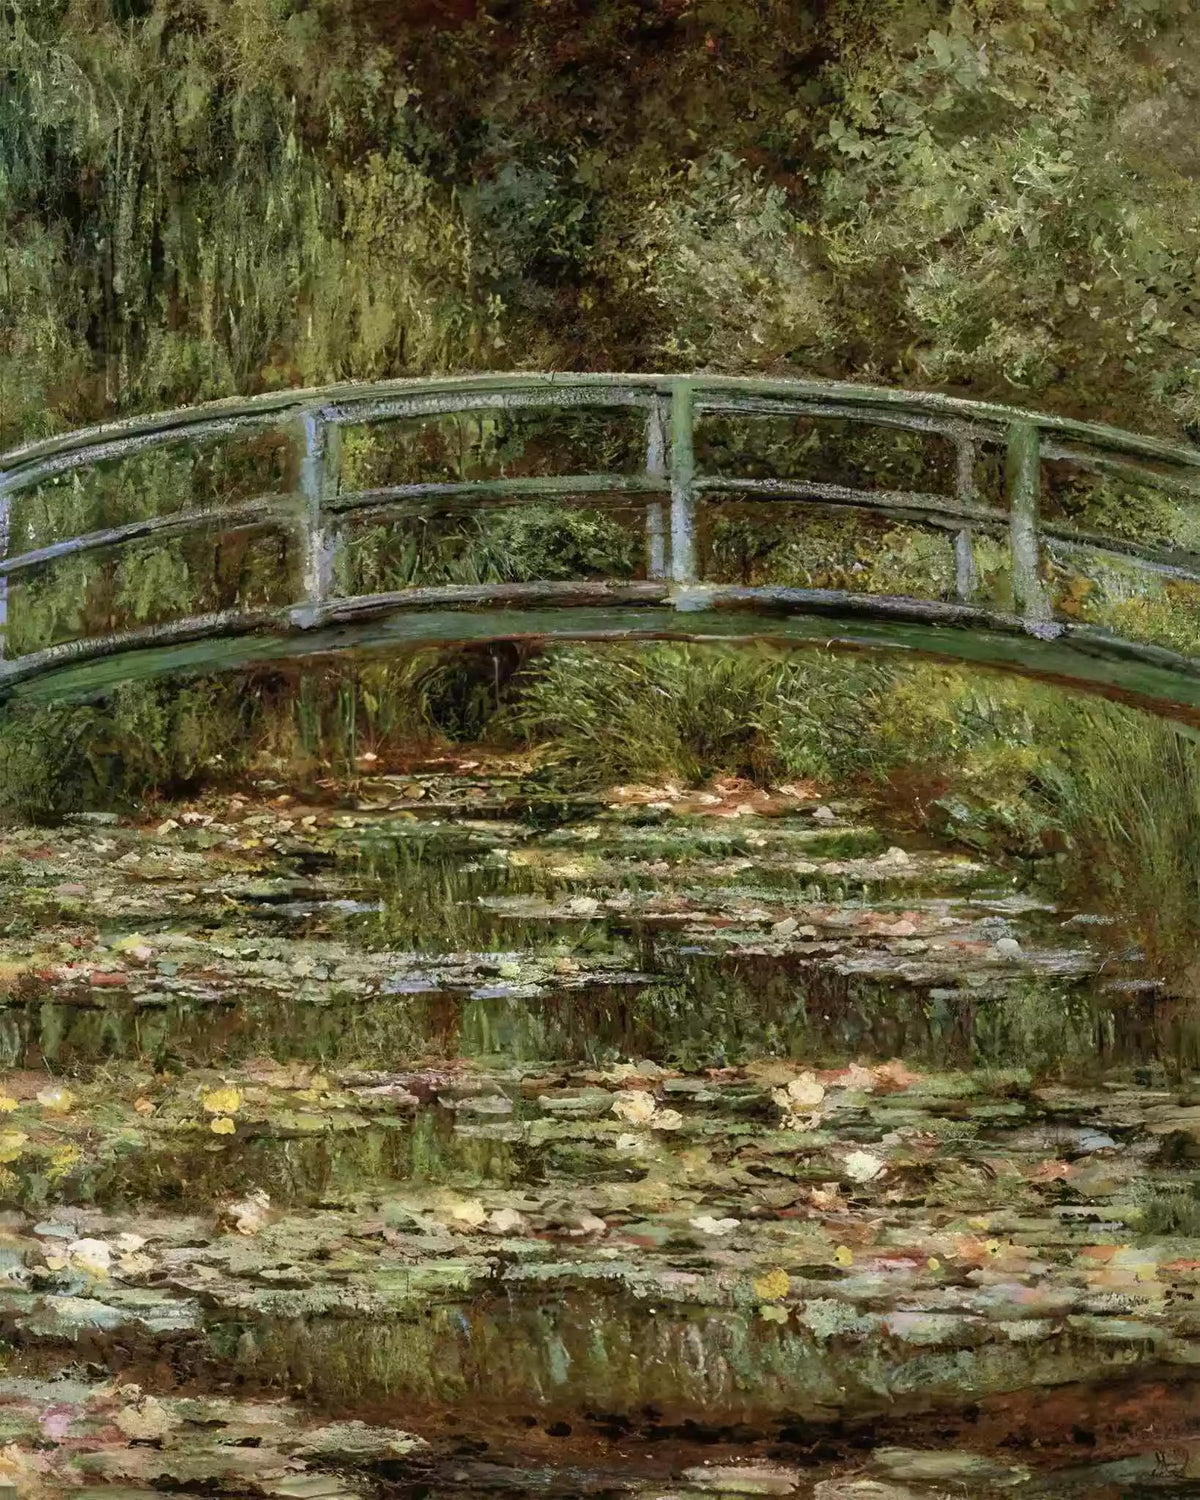 Bridge over a Pond of Water Lilies - Paint with diamonds kit - 16"x20" (40x50cm)